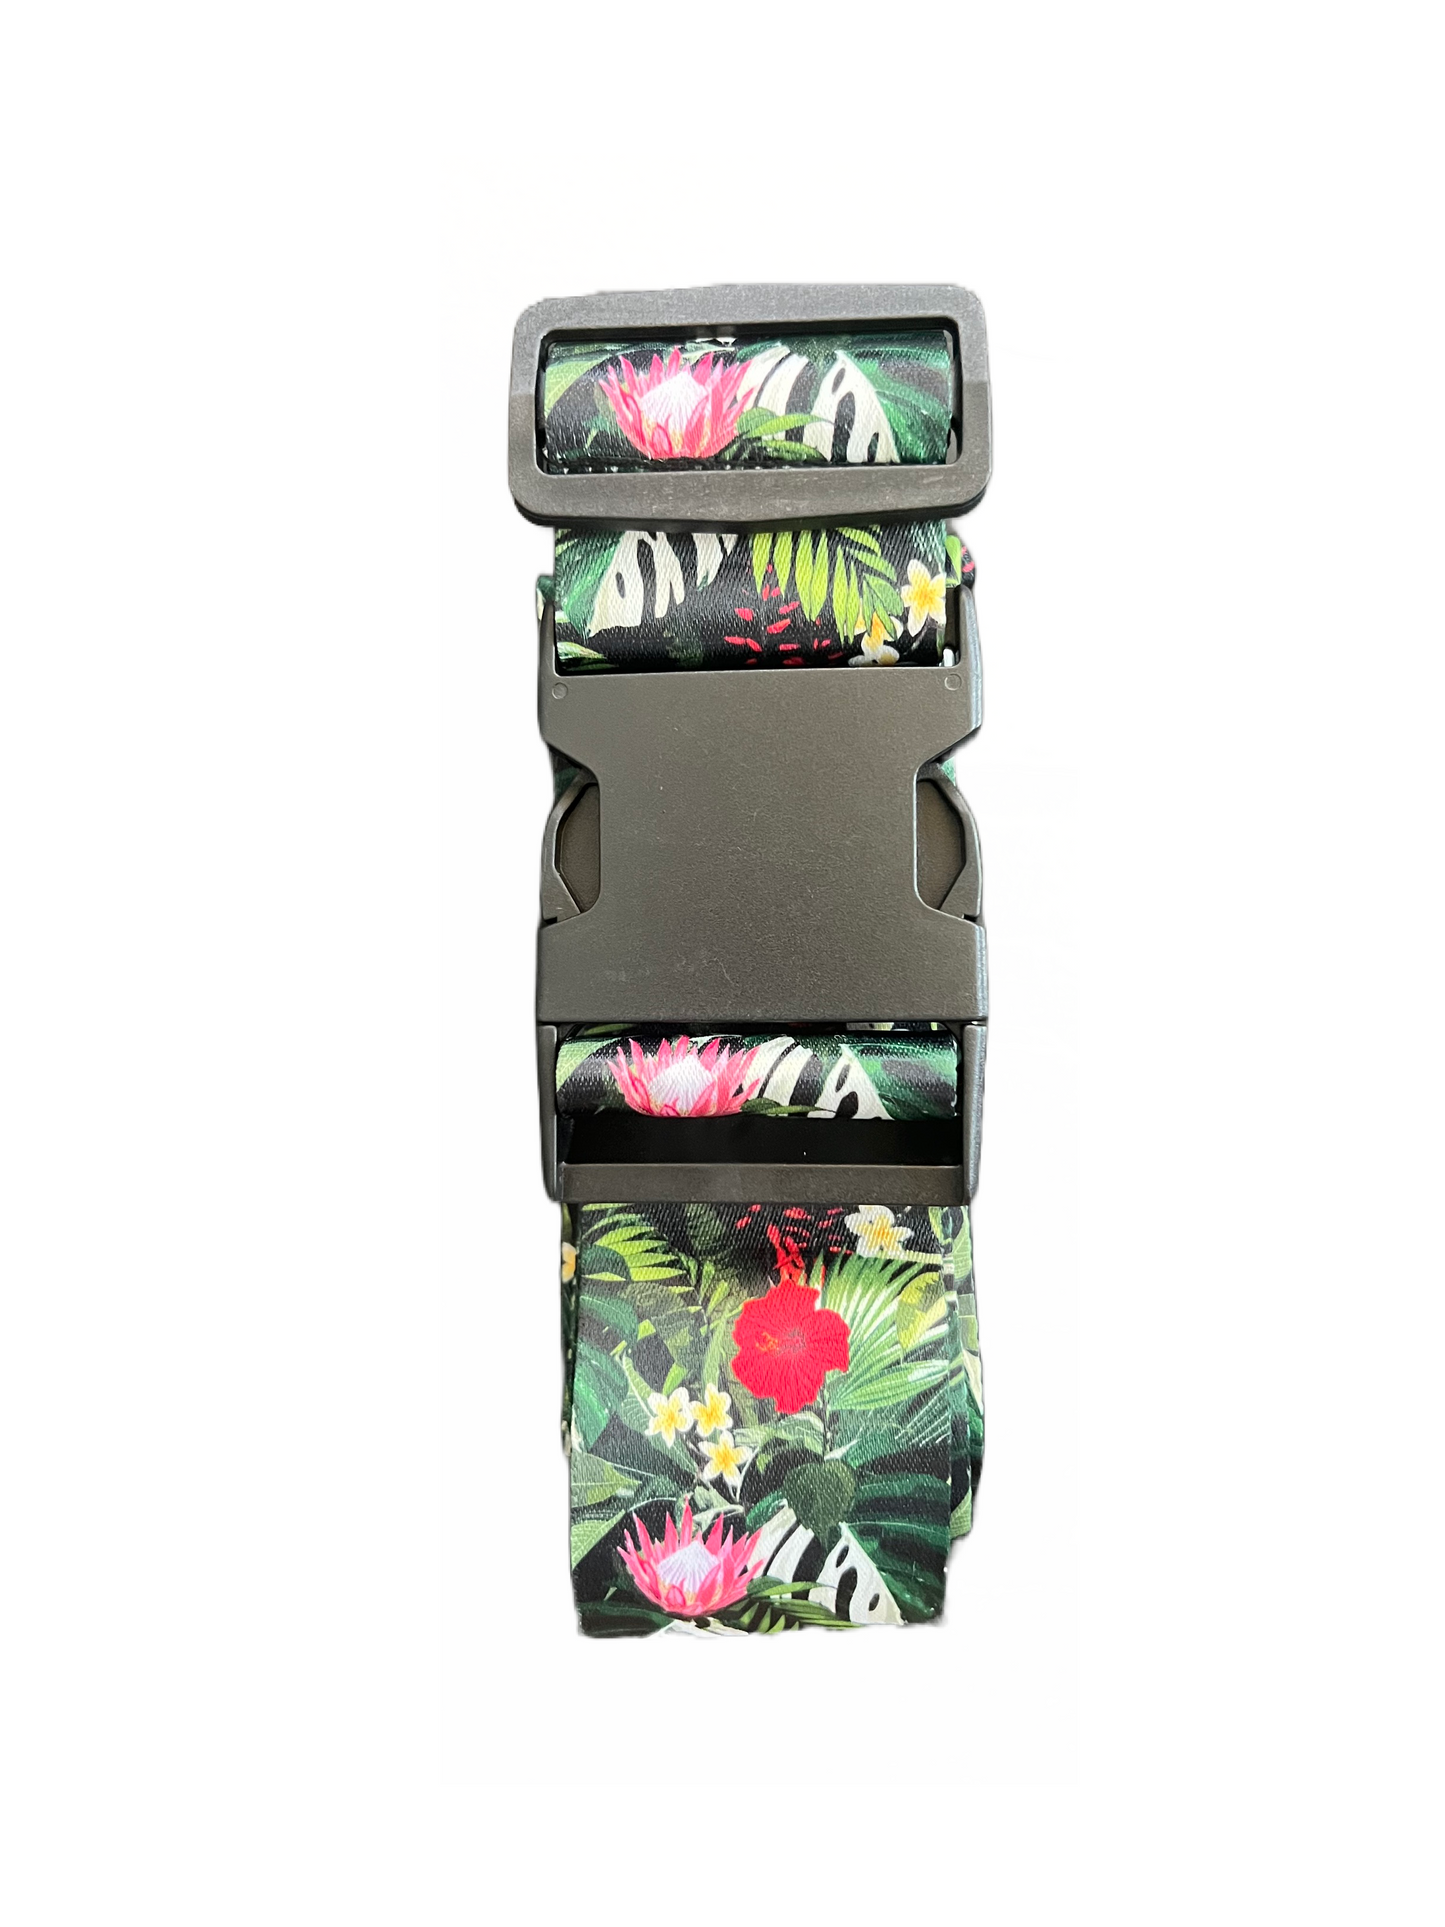 Luggage Strap (Approx. 40-80 inches)- Assorted Designs